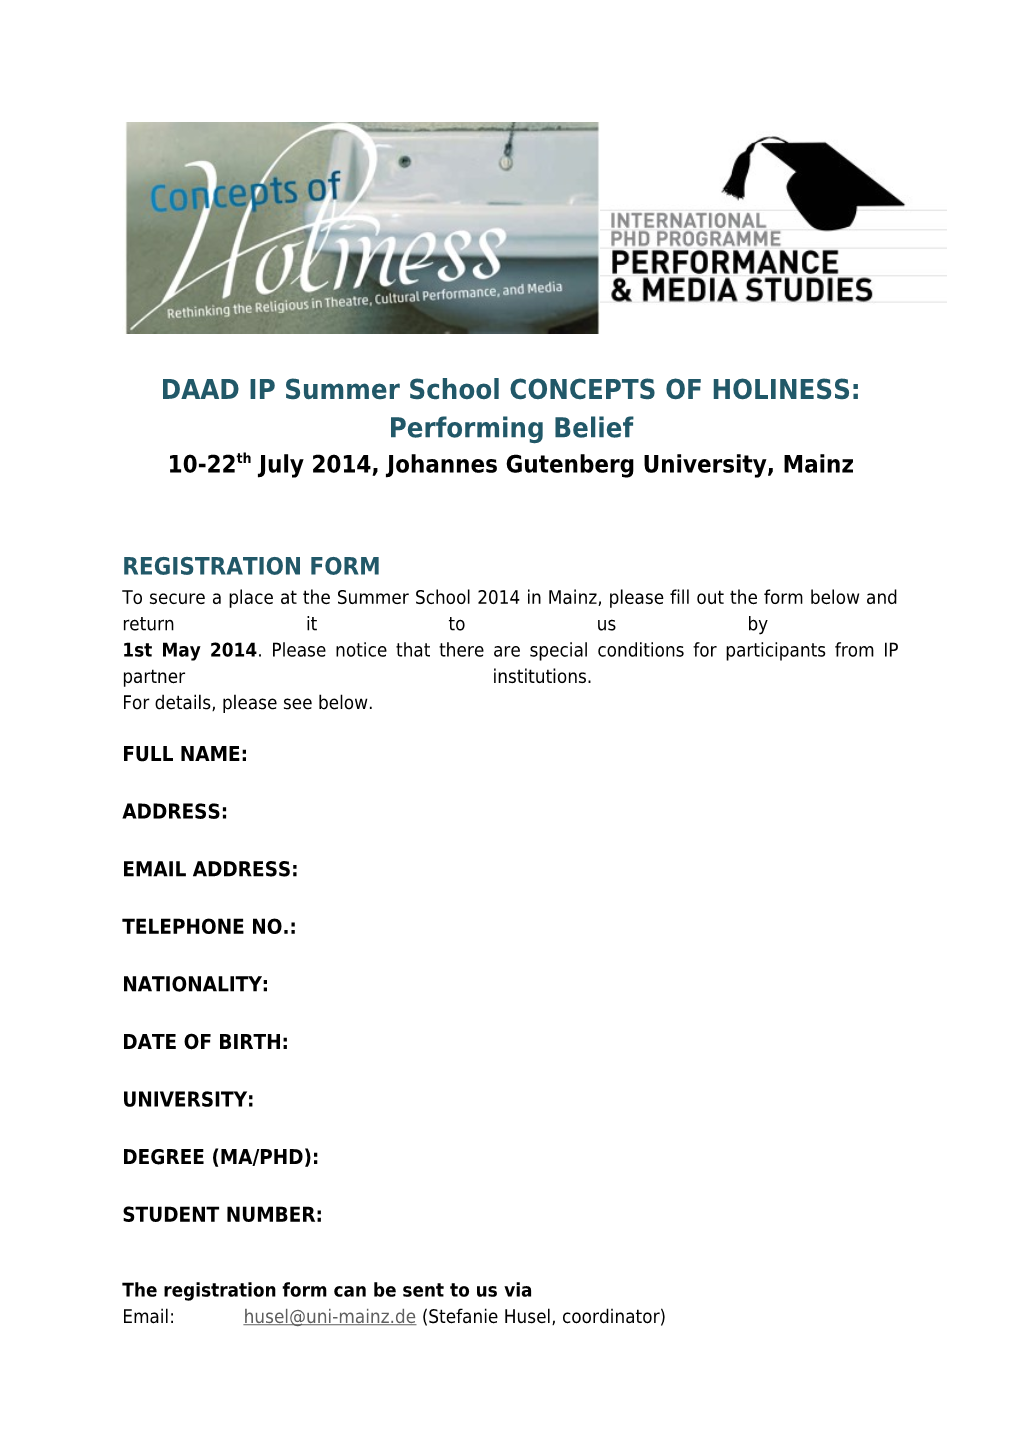 DAAD IP Summer School CONCEPTS of HOLINESS: Performing Belief